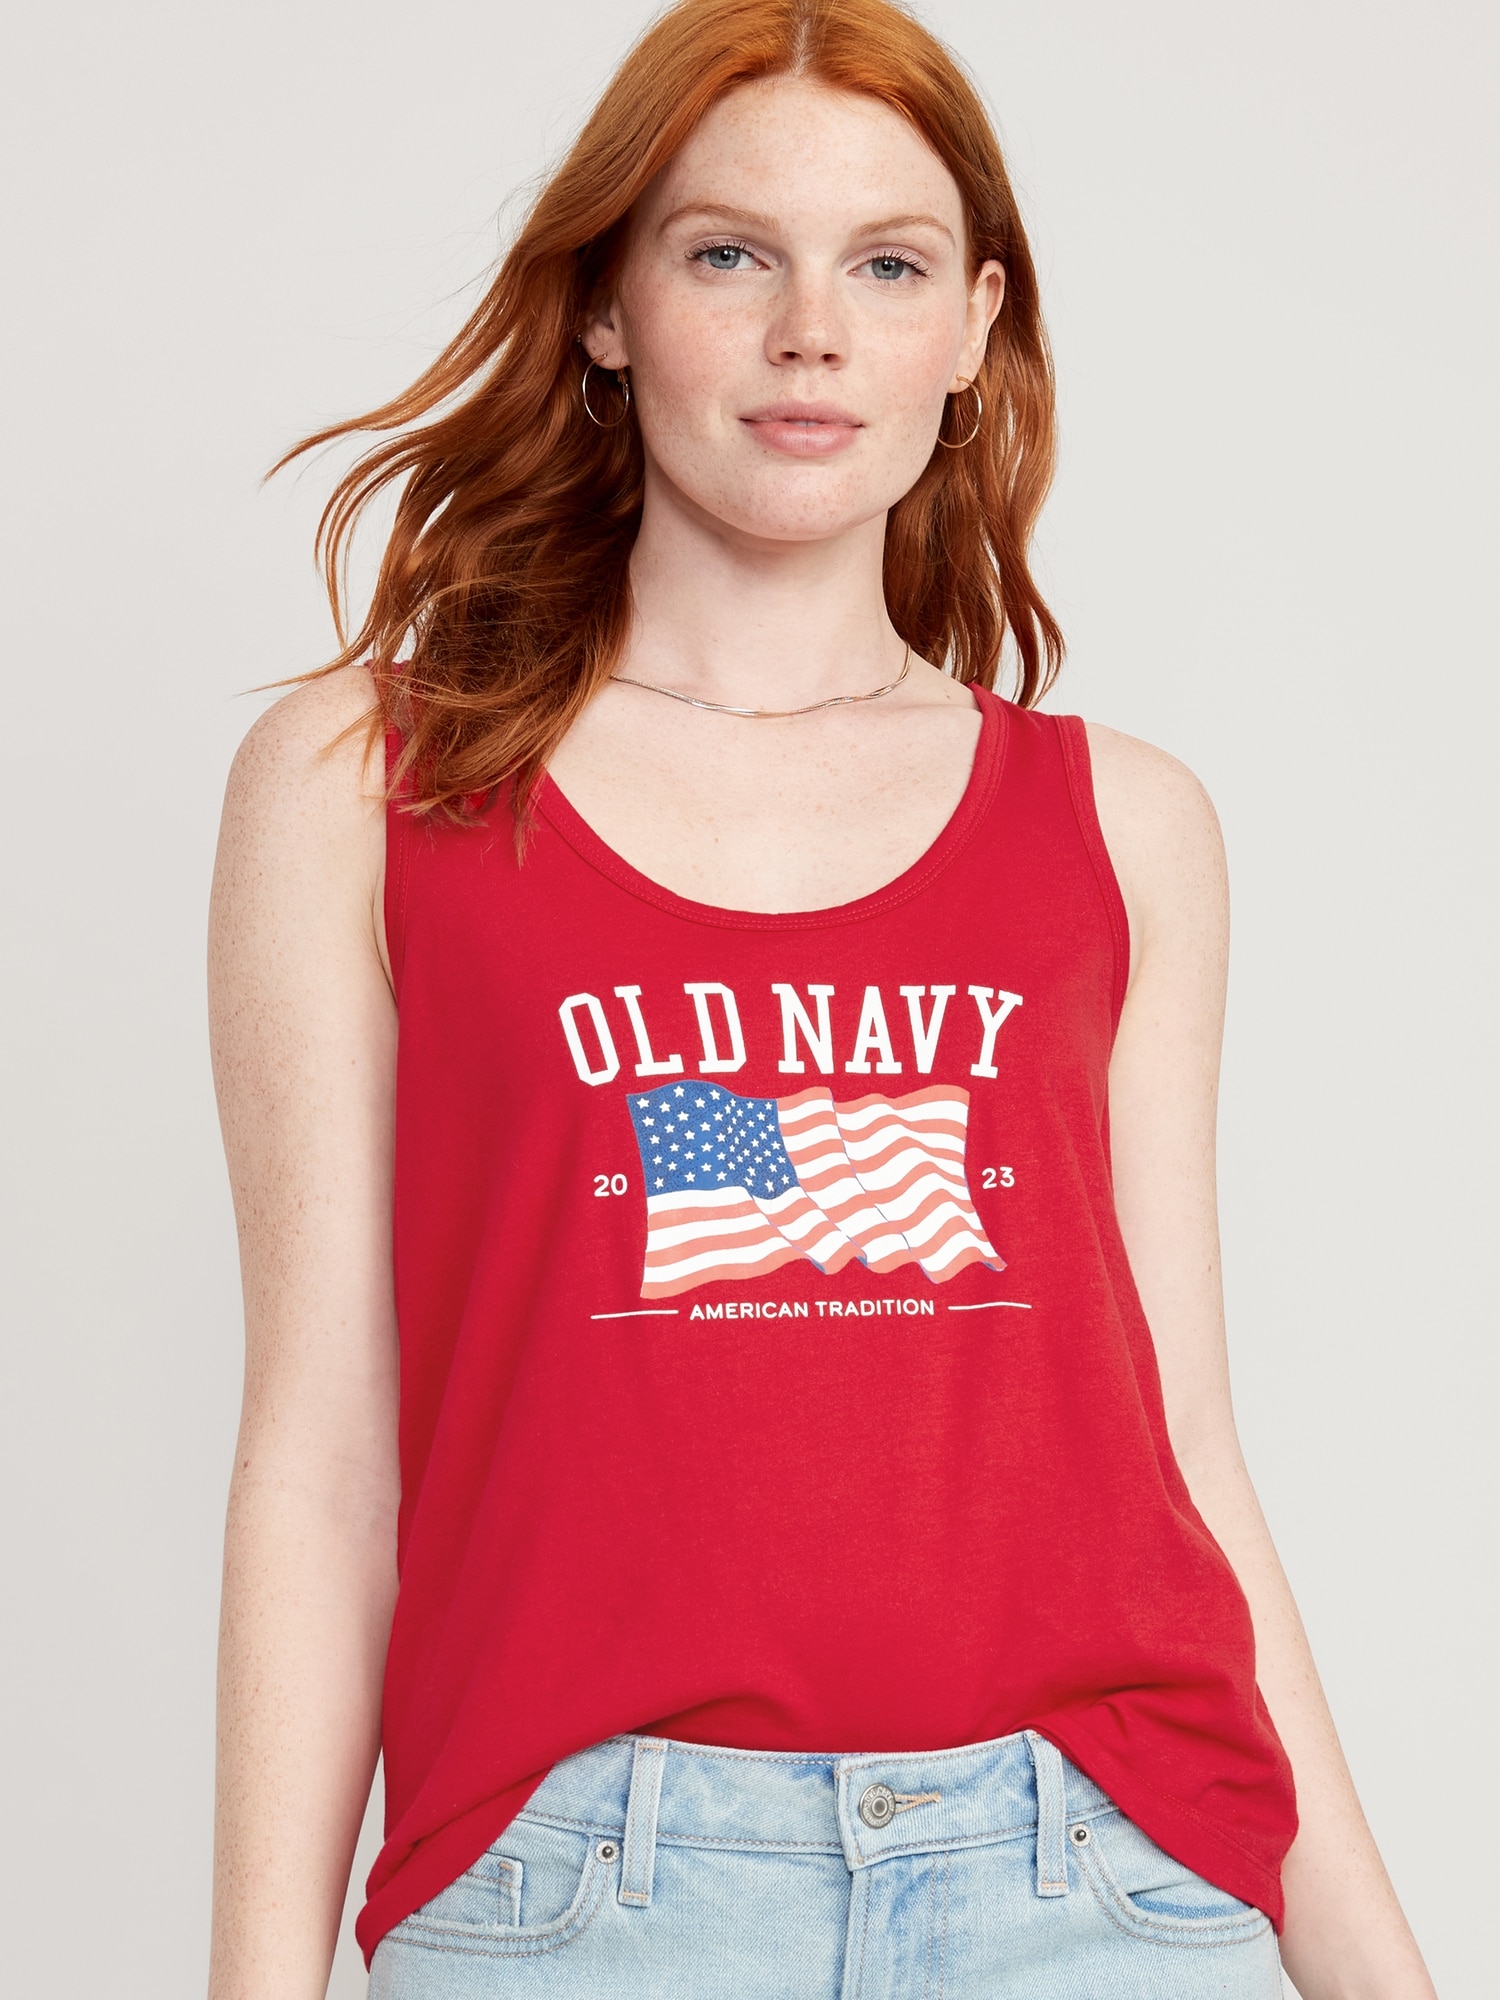 Old Navy Matching "Old Navy" Flag Tank Top for Women red. 1